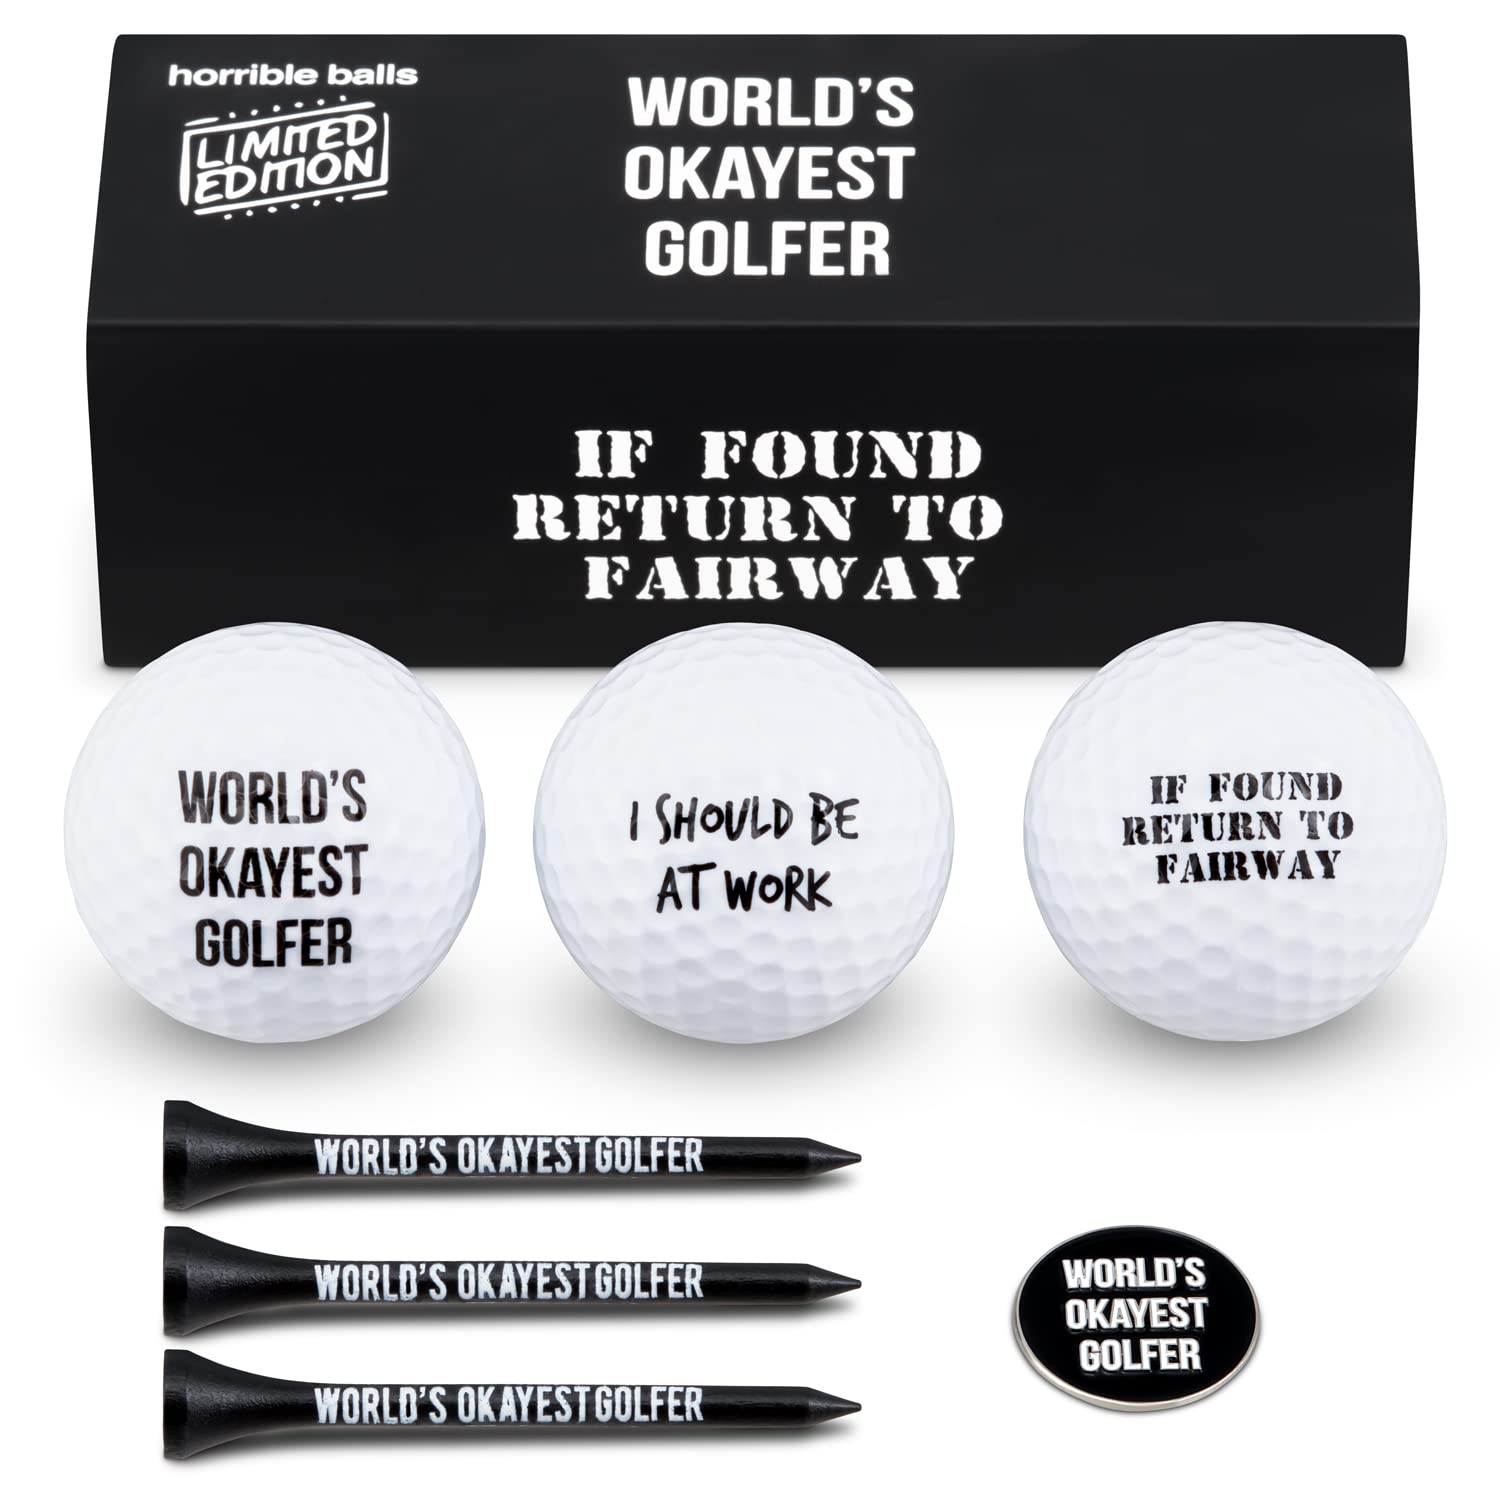 37 Ridiculously Funny Golf Gifts That Are Even More Hilarious Than Falling  In A Water Hazard